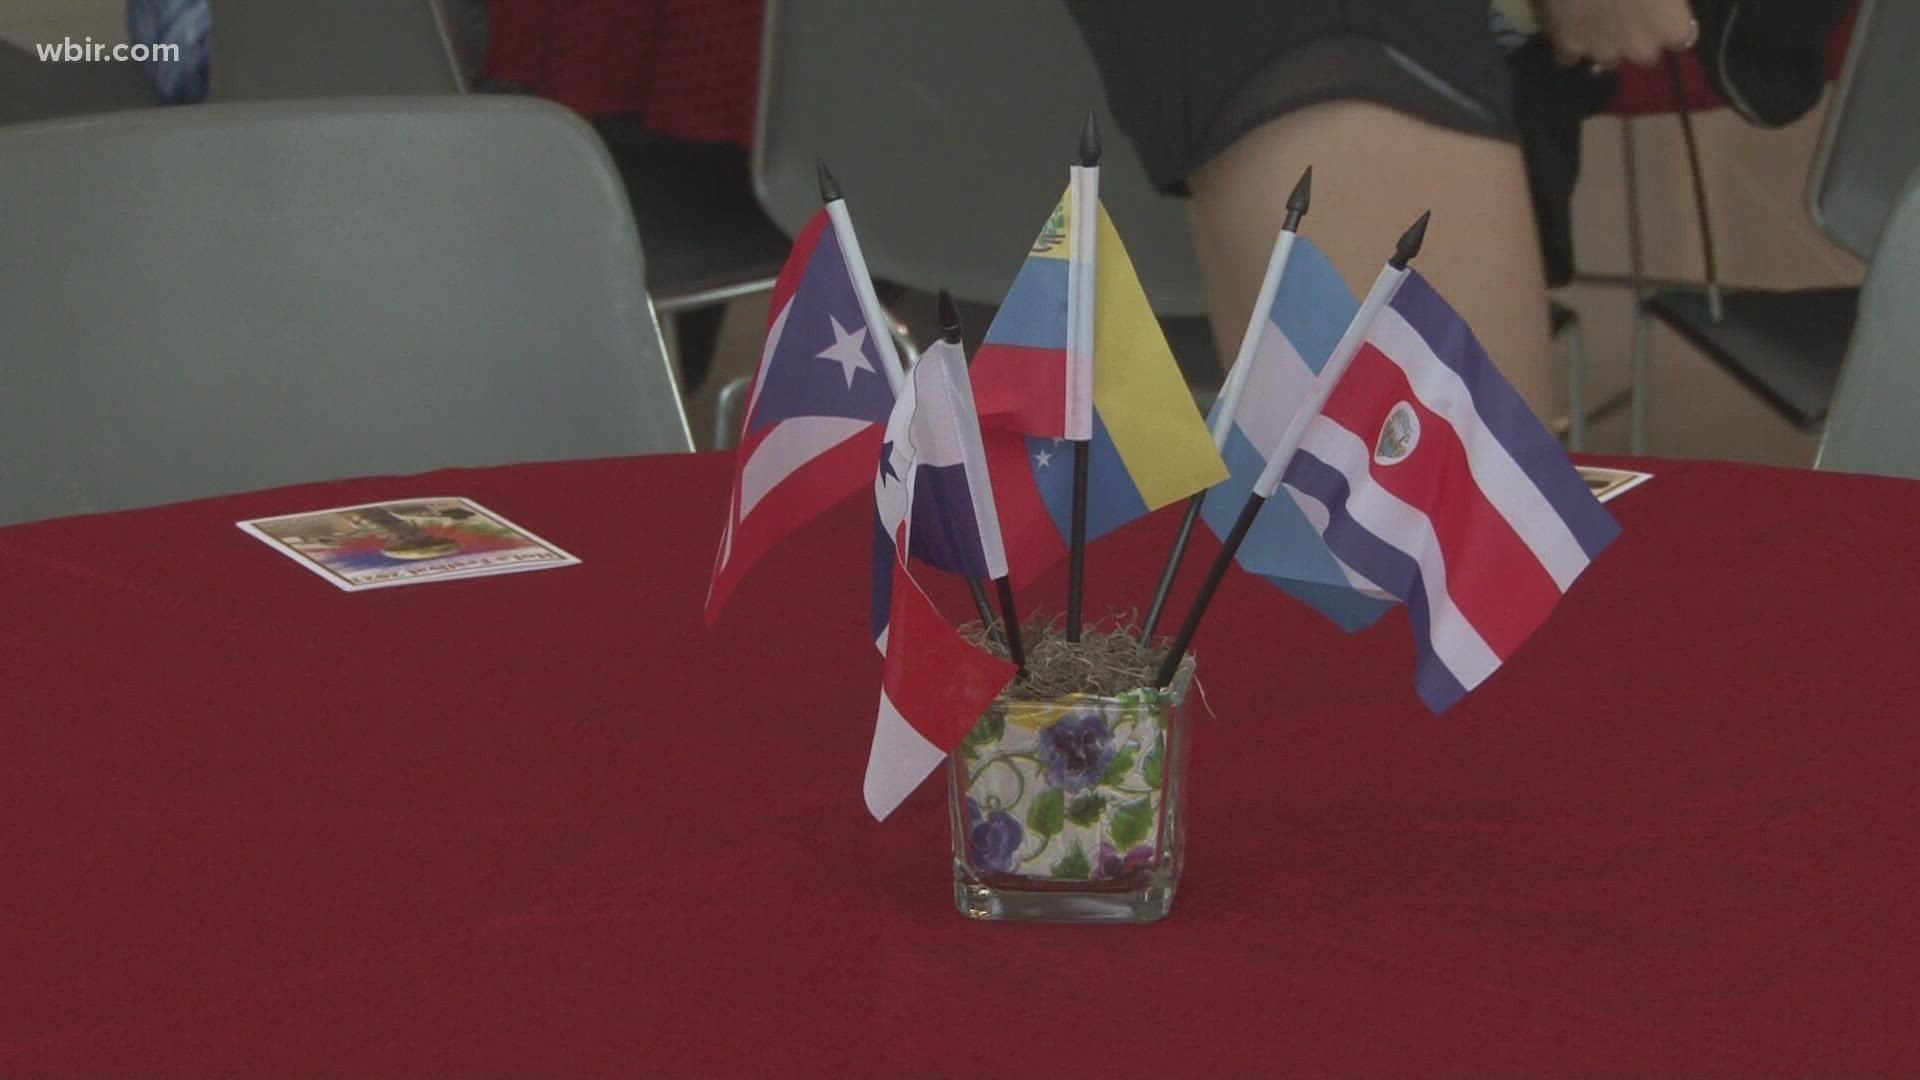 The nonprofit held its 21st annual kick-off celebration in downtown Knoxville on Wednesday, celebrating Hispanic Heritage Month.